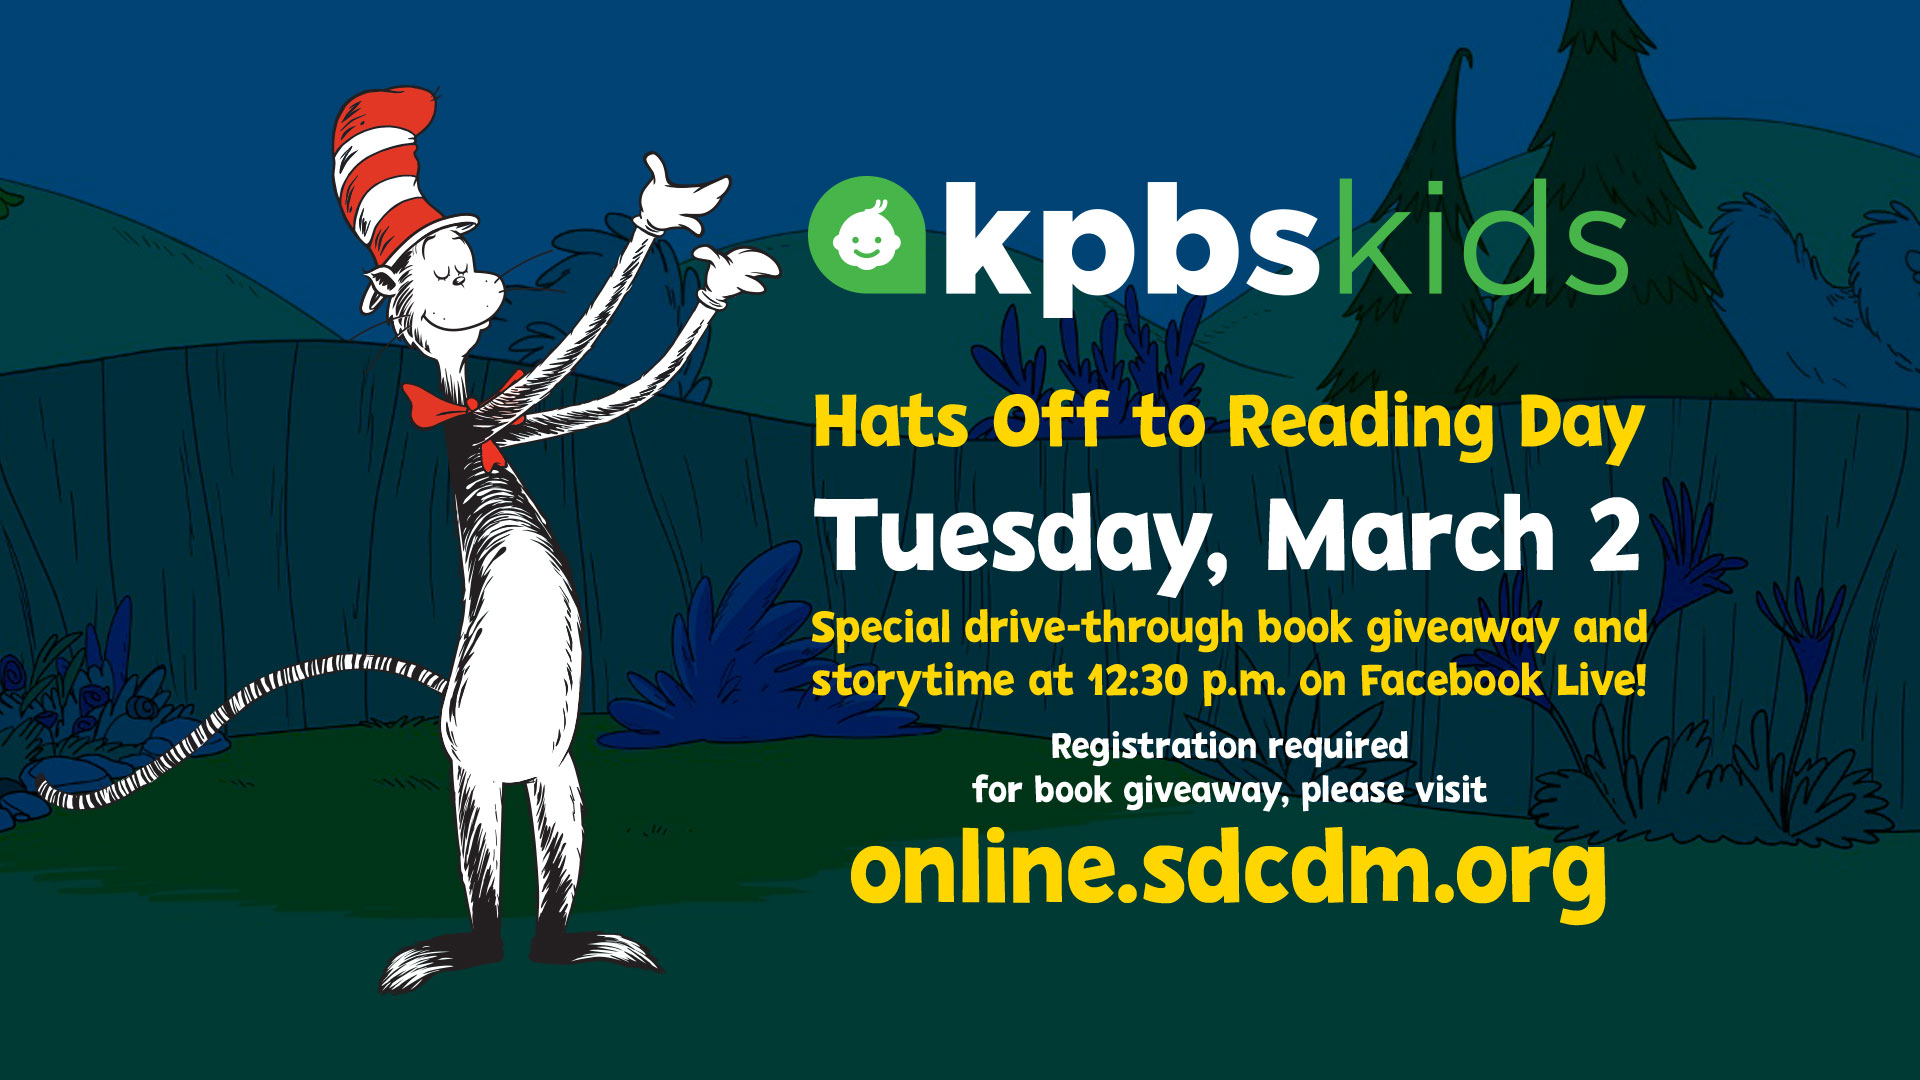 KPBS Kids Event Hats Off to Reading Day San Diego Children’s